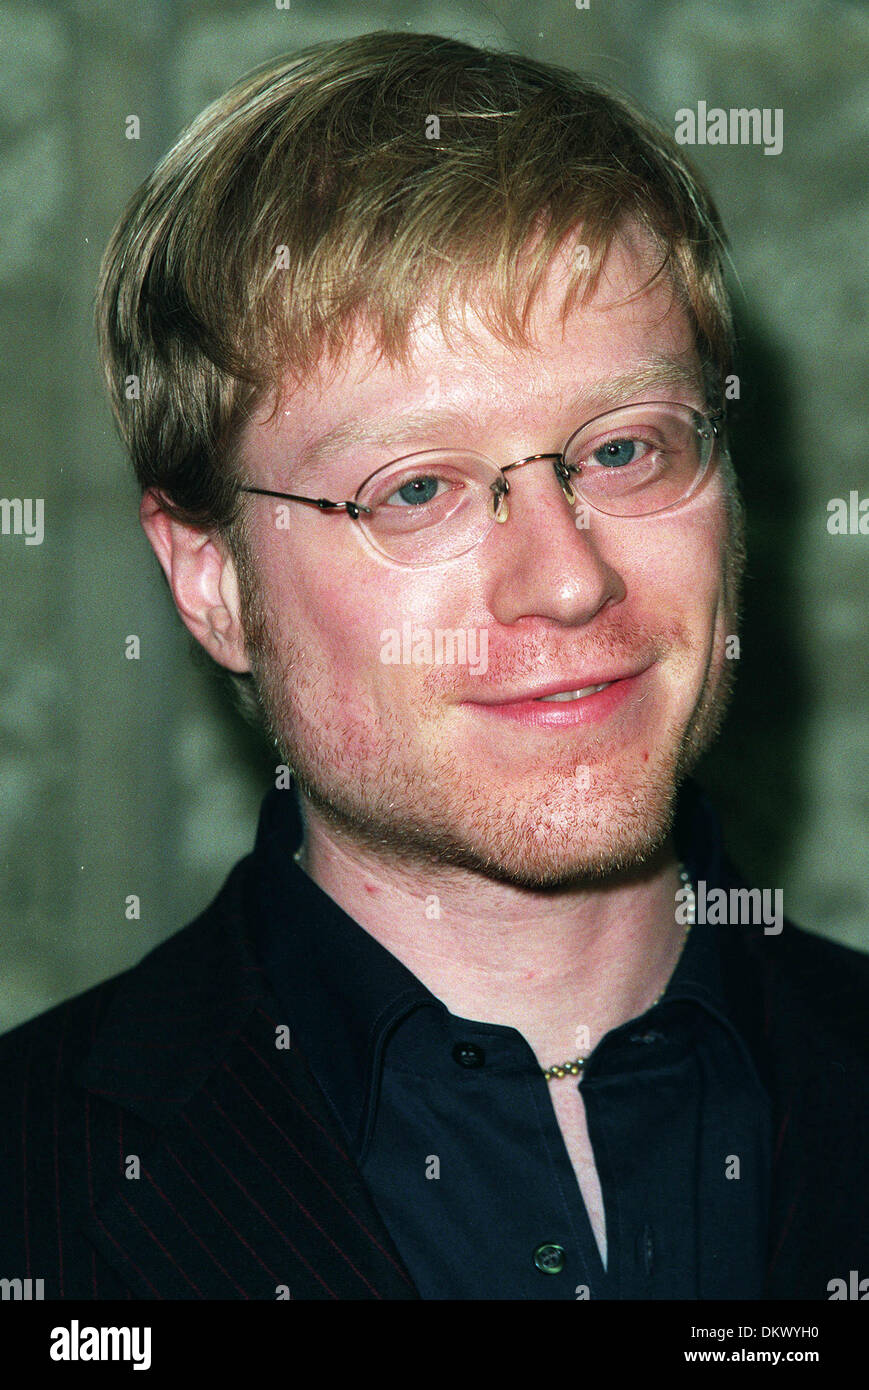 ANTHONY RAPP.ACTOR.LOS ANGELES, USA.18/12/2001.BN90A7 Stock Photo